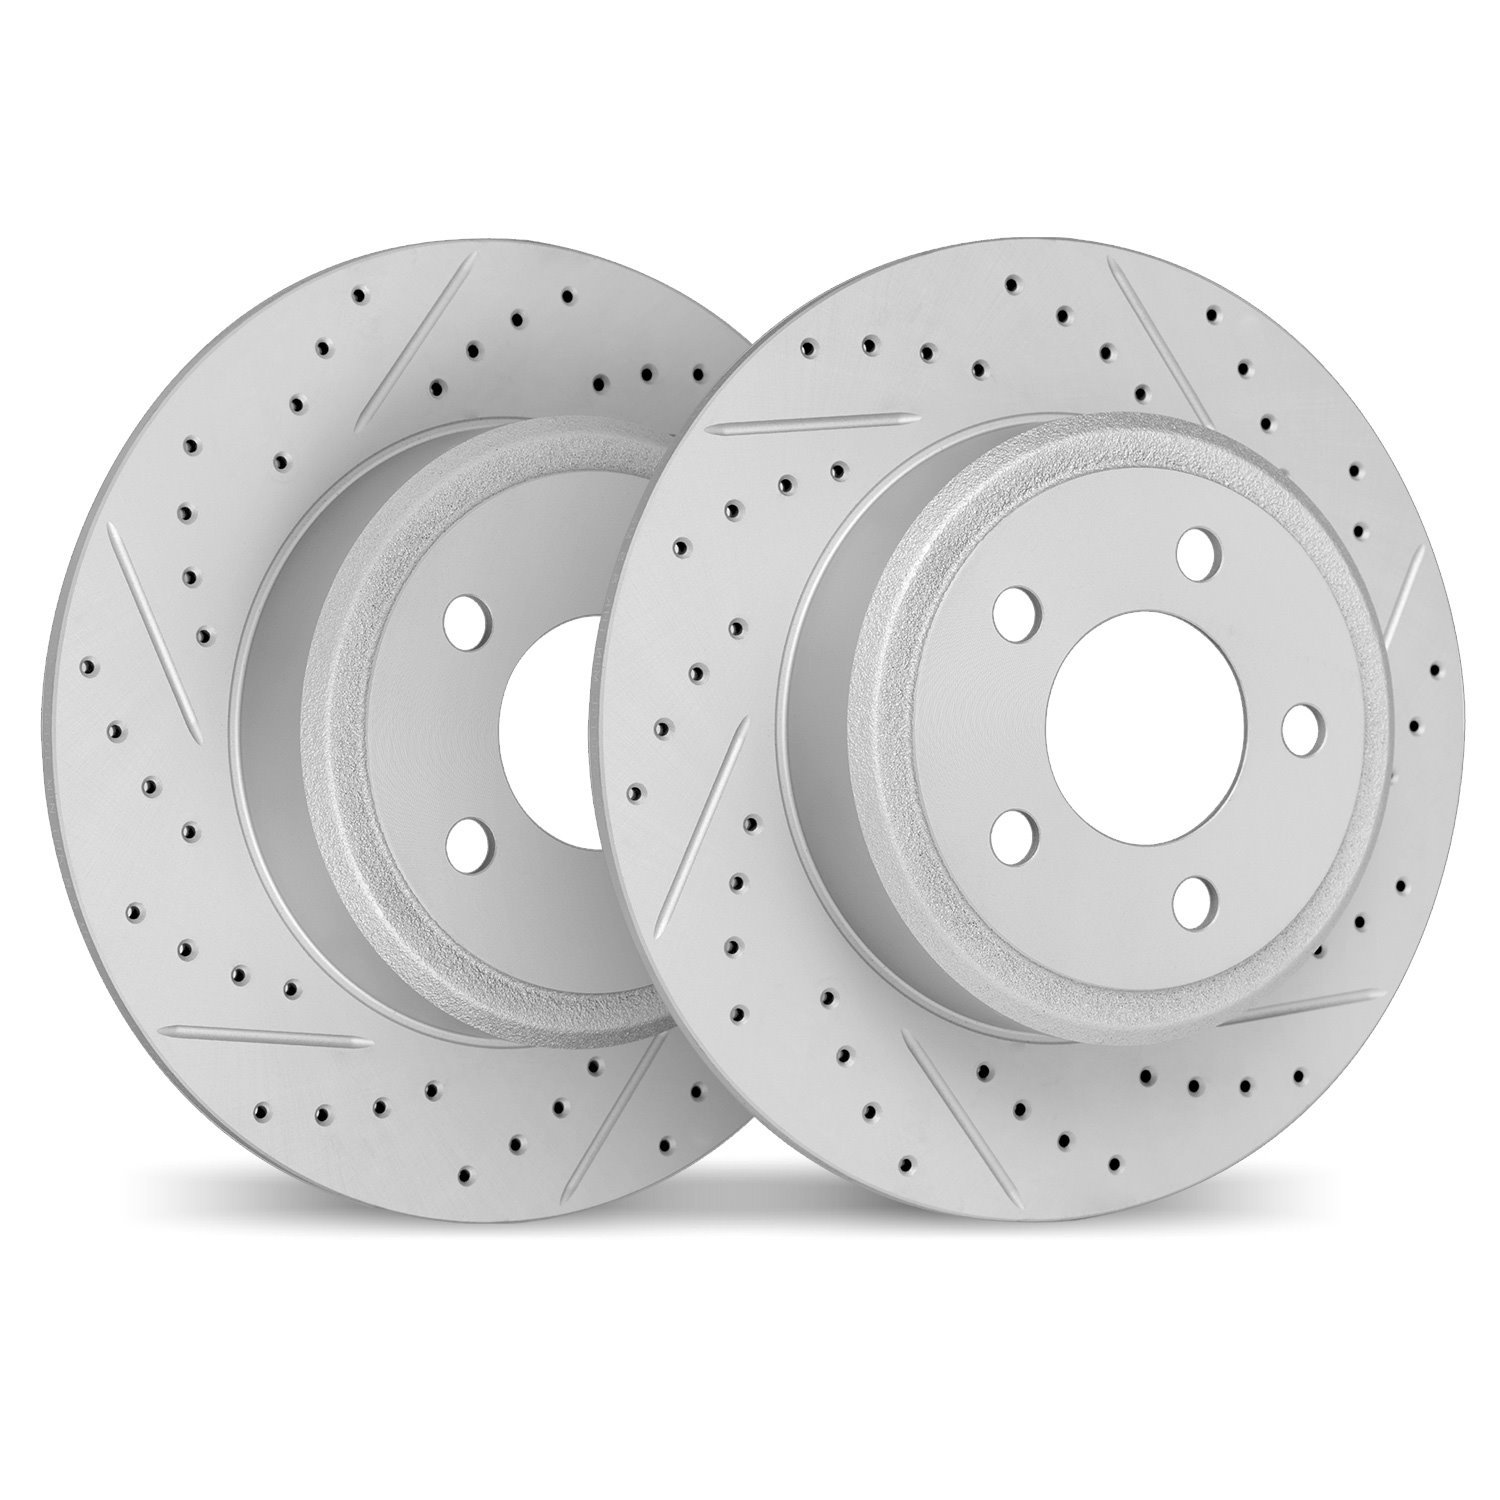 2002-59054 Geoperformance Drilled/Slotted Brake Rotors, Fits Select Acura/Honda, Position: Rear